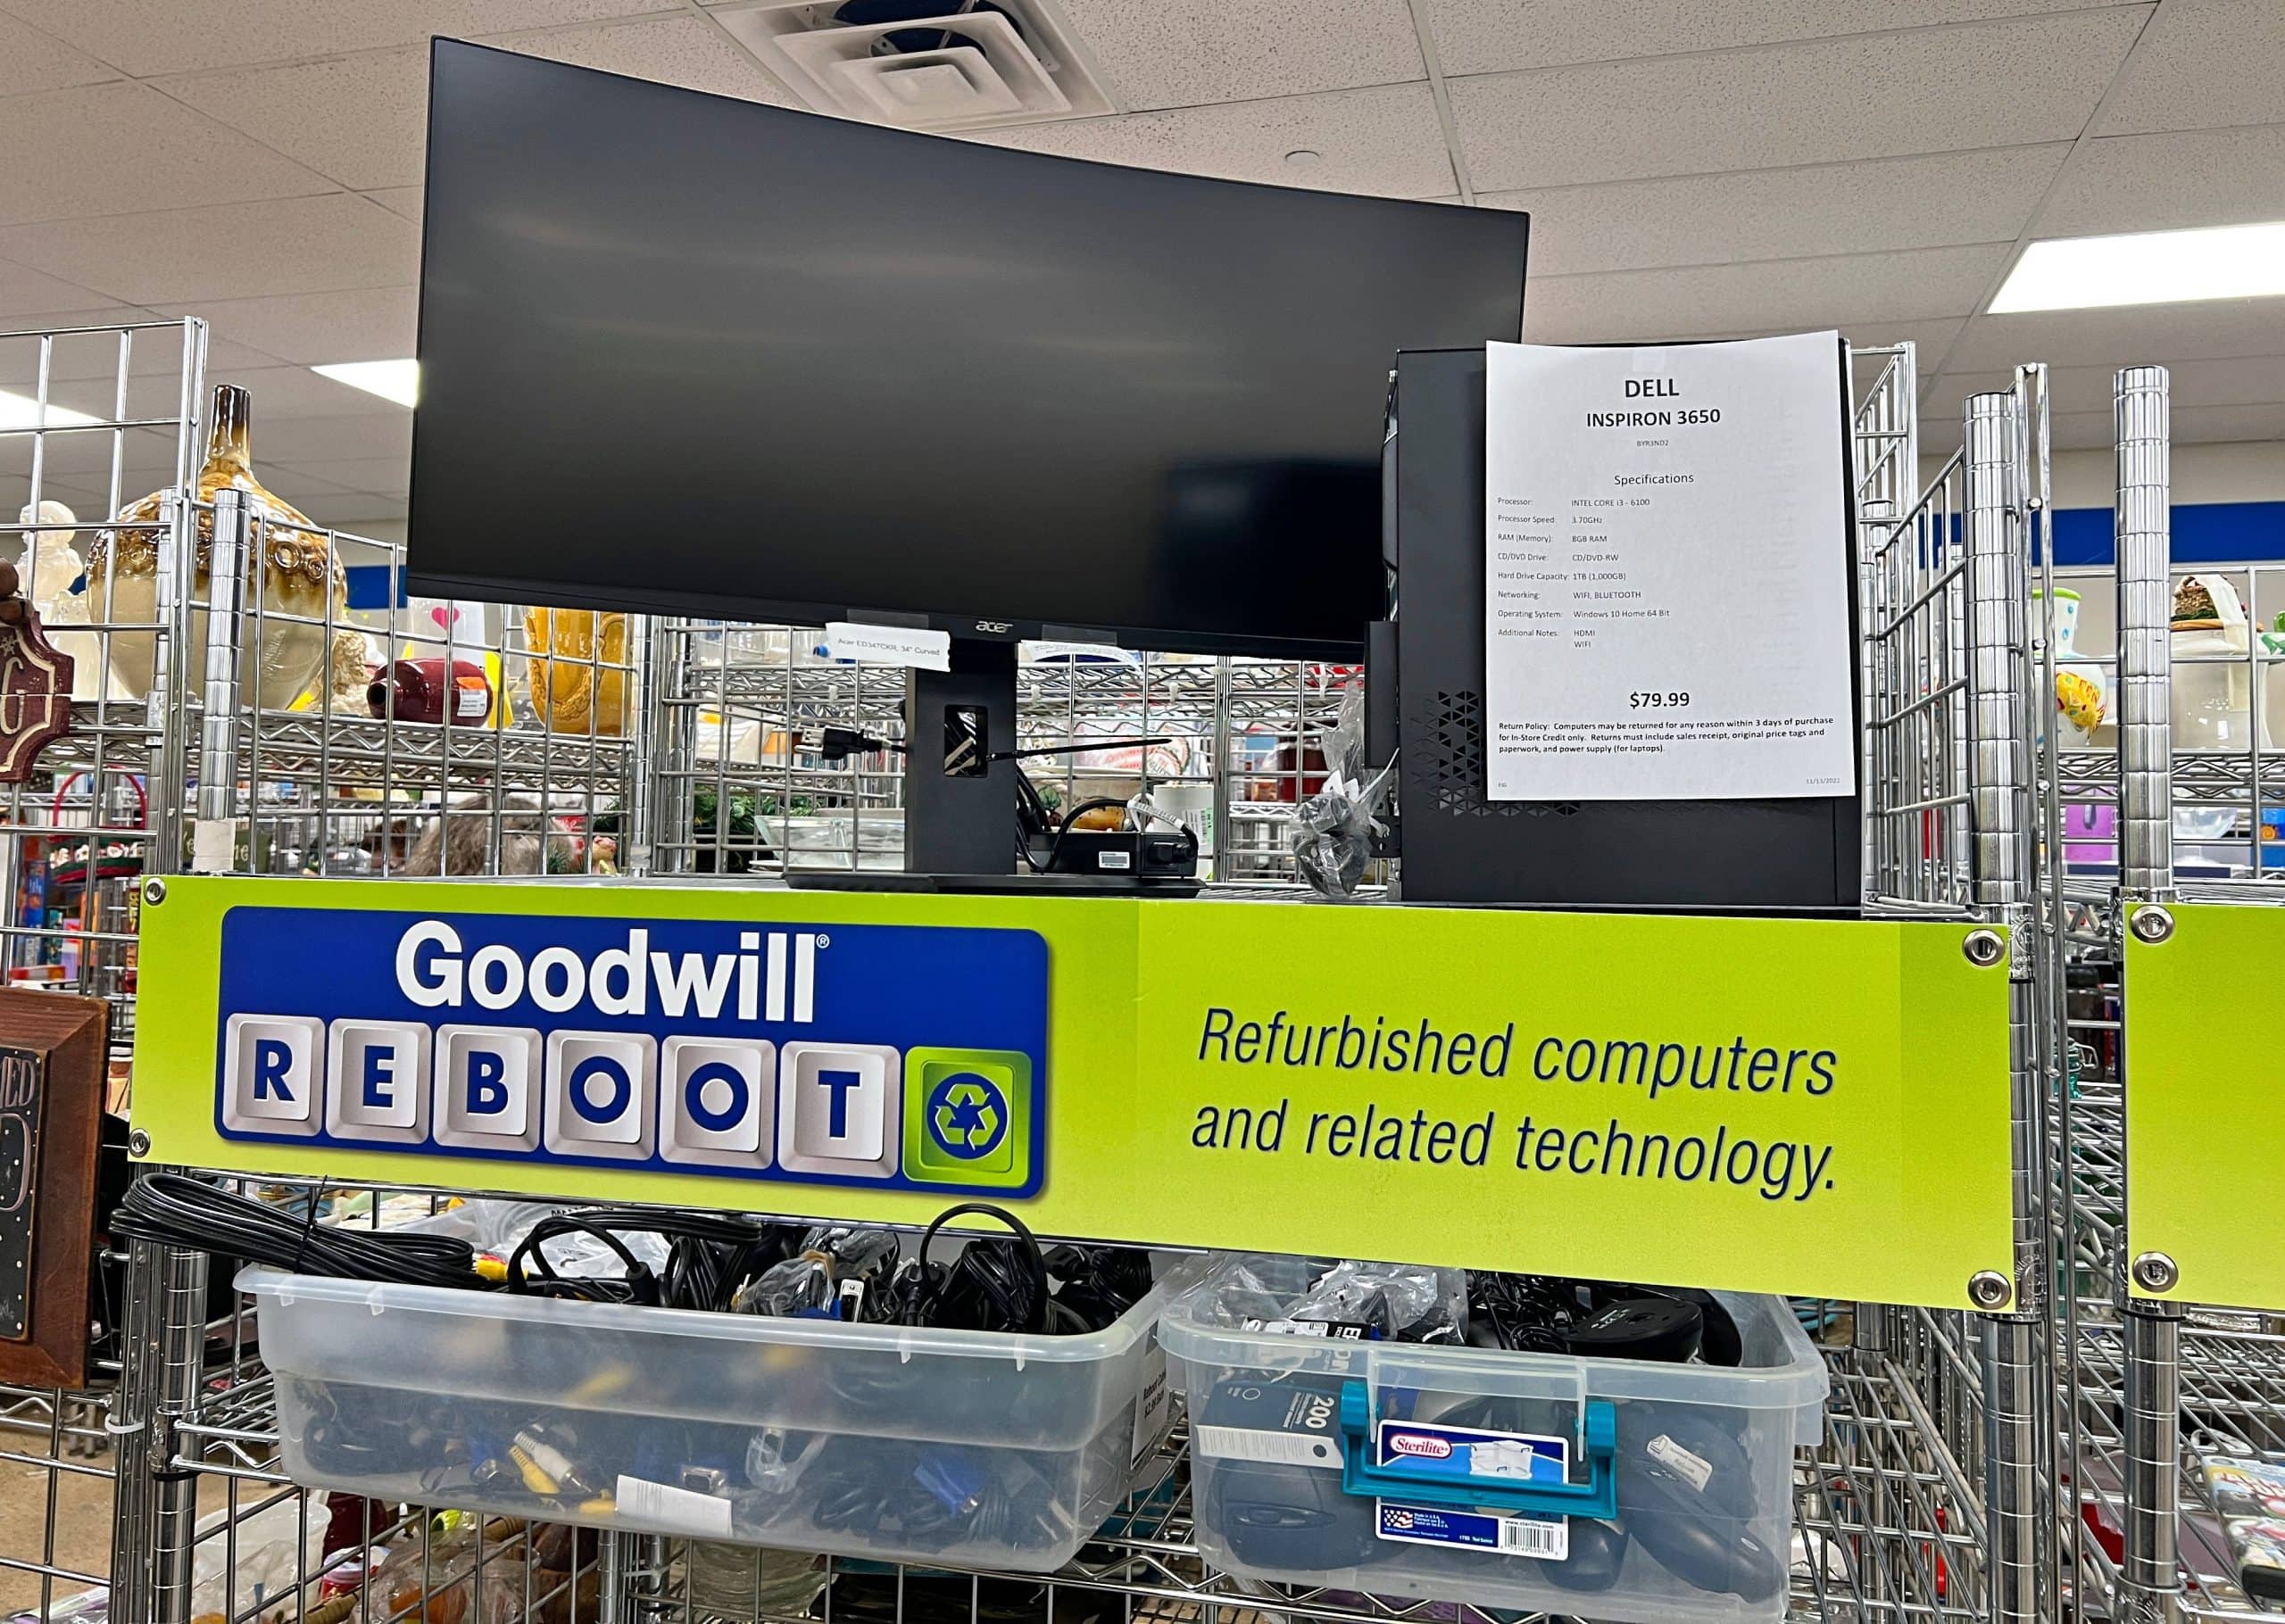 Goodwill Reboot section in the Cedar Rapids East Goodwill Store that allows shoppers to select refurbished computers and a variety of computer equipment.